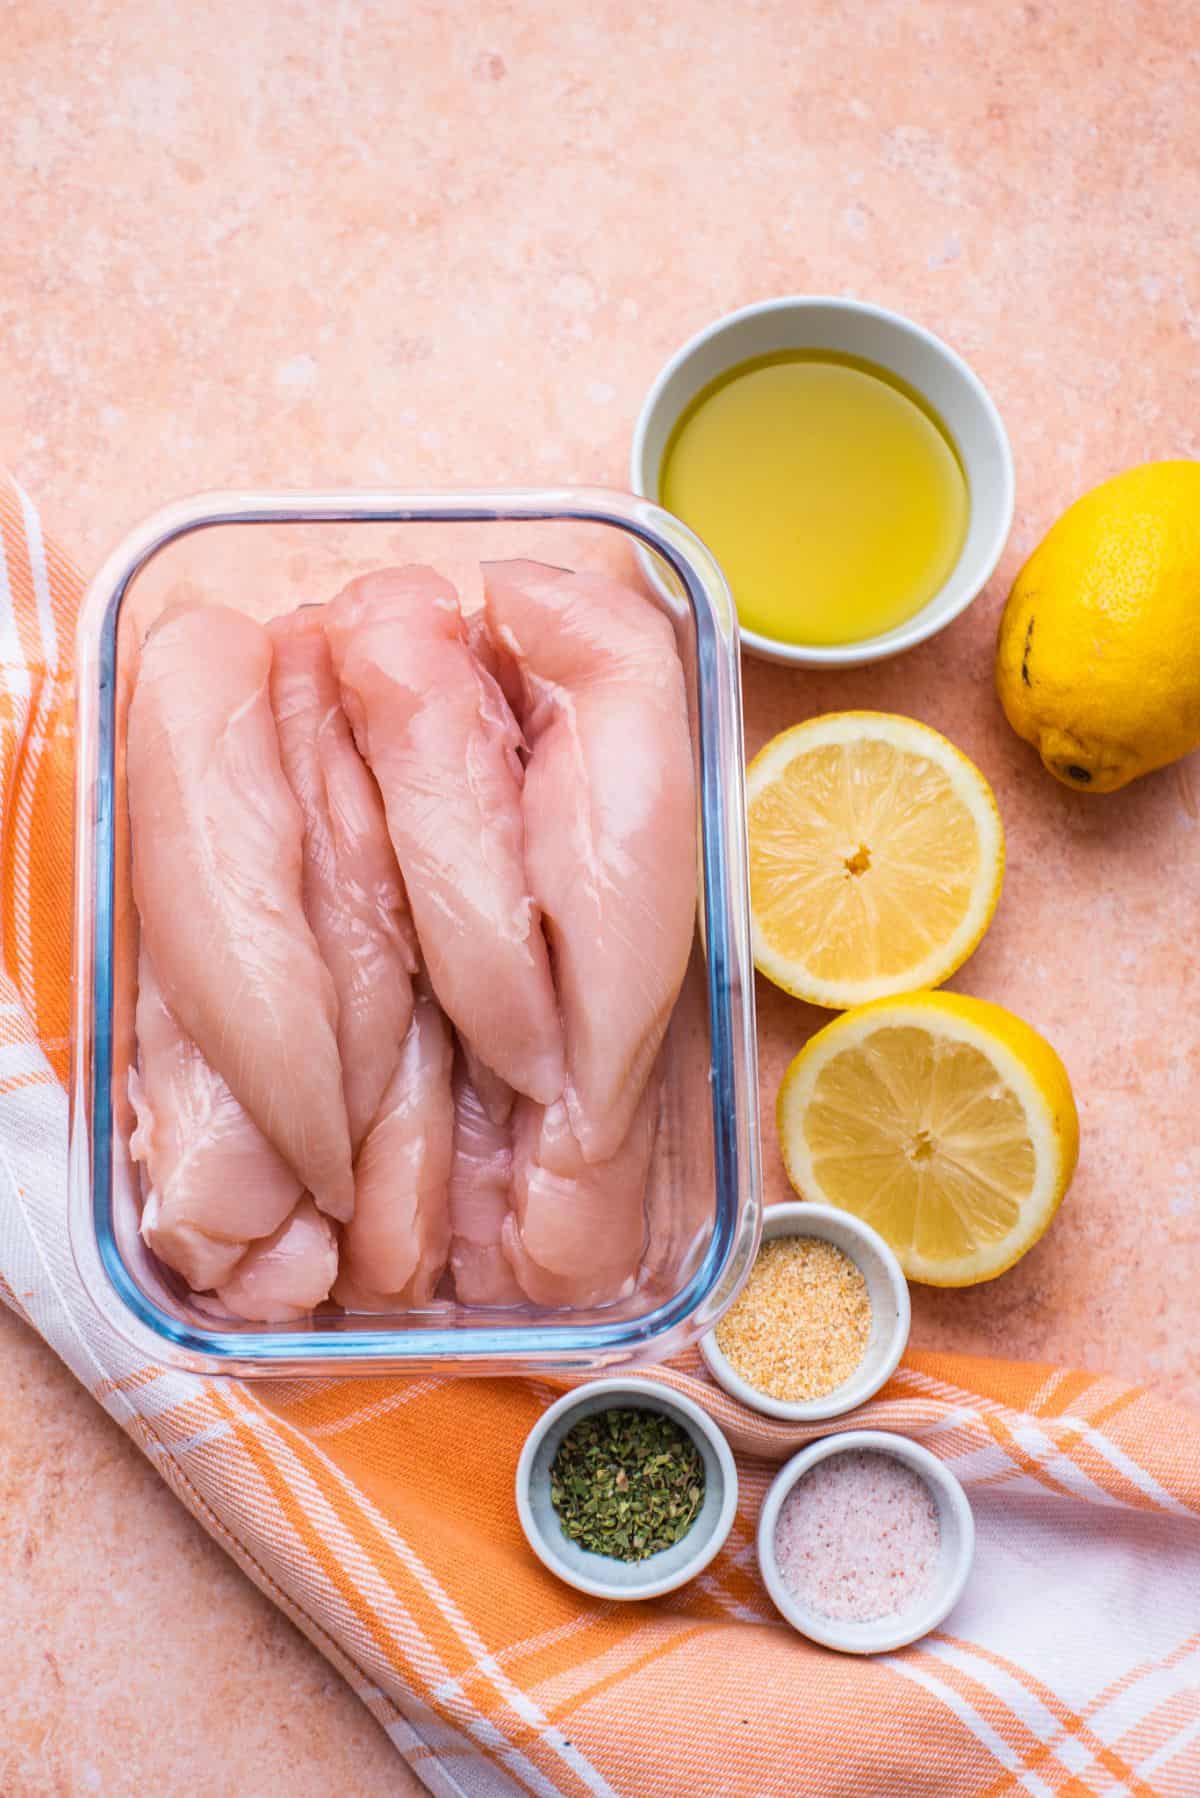 raw chicken strips in a glass container olive oil sliced lemon and seasonings